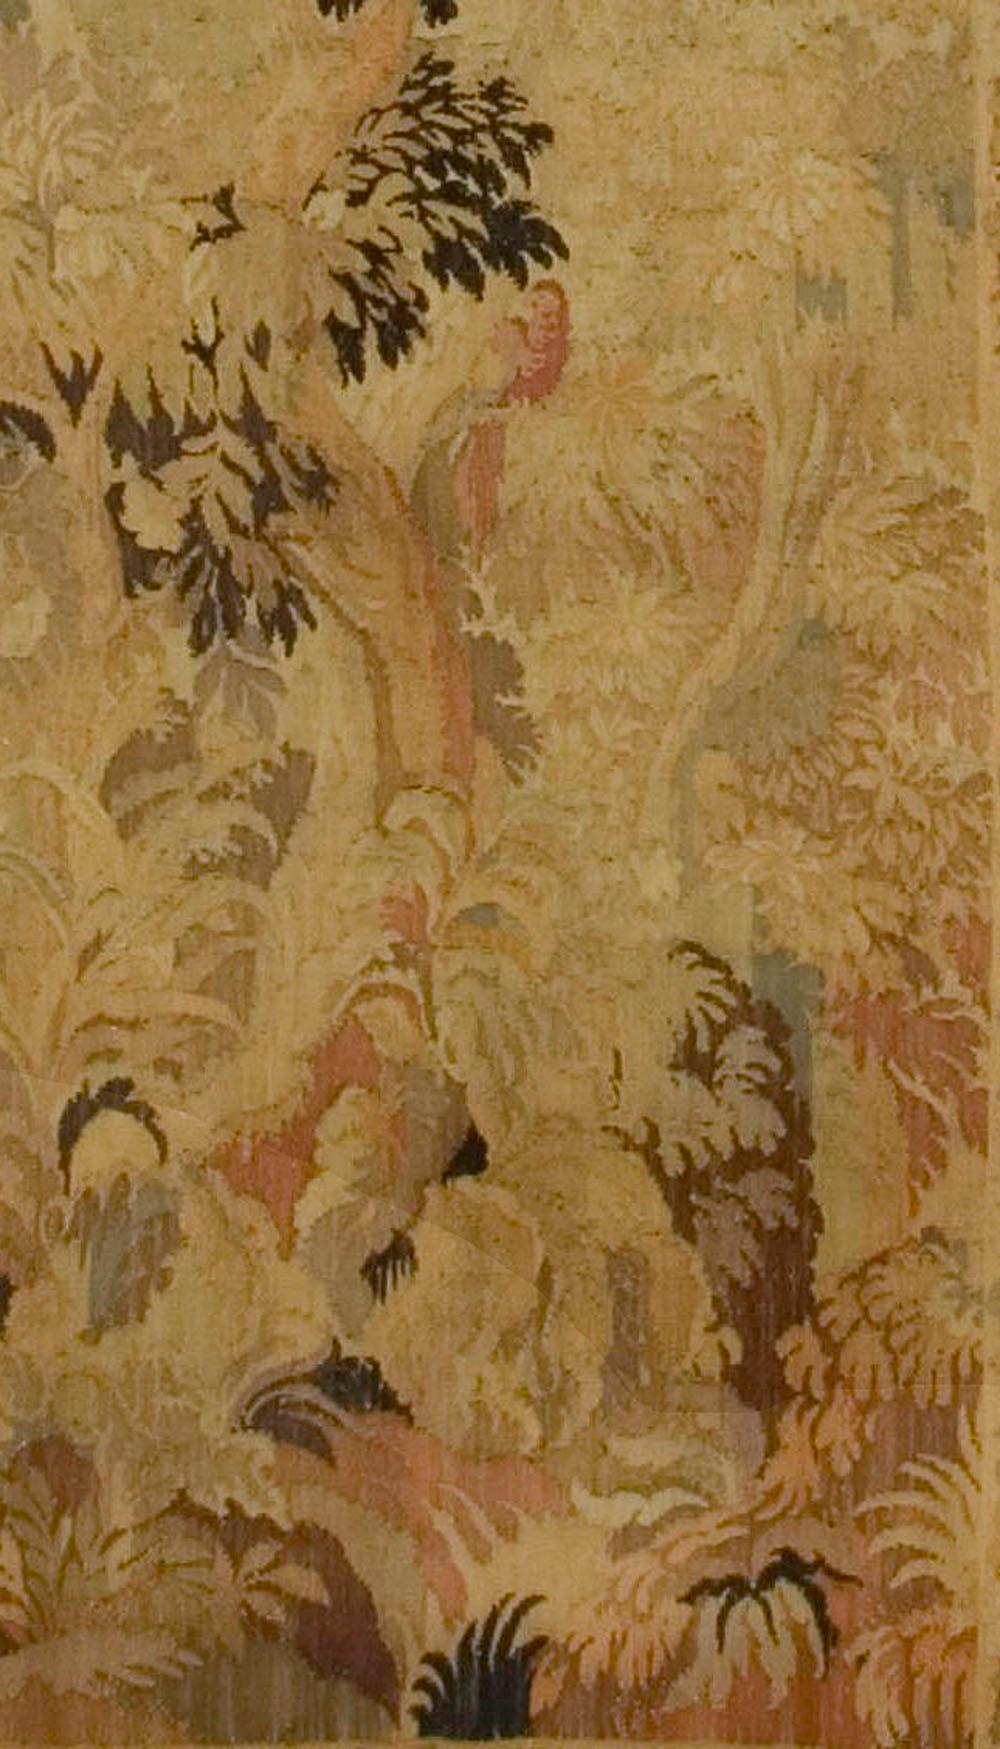 Antique French Forest scene tapestry, circa 1880, 4'6 x 10'. An antique French fine hand-loomed tapestry, circa 1880. A forest scene, with trees and foliage surrounded by a floral border.